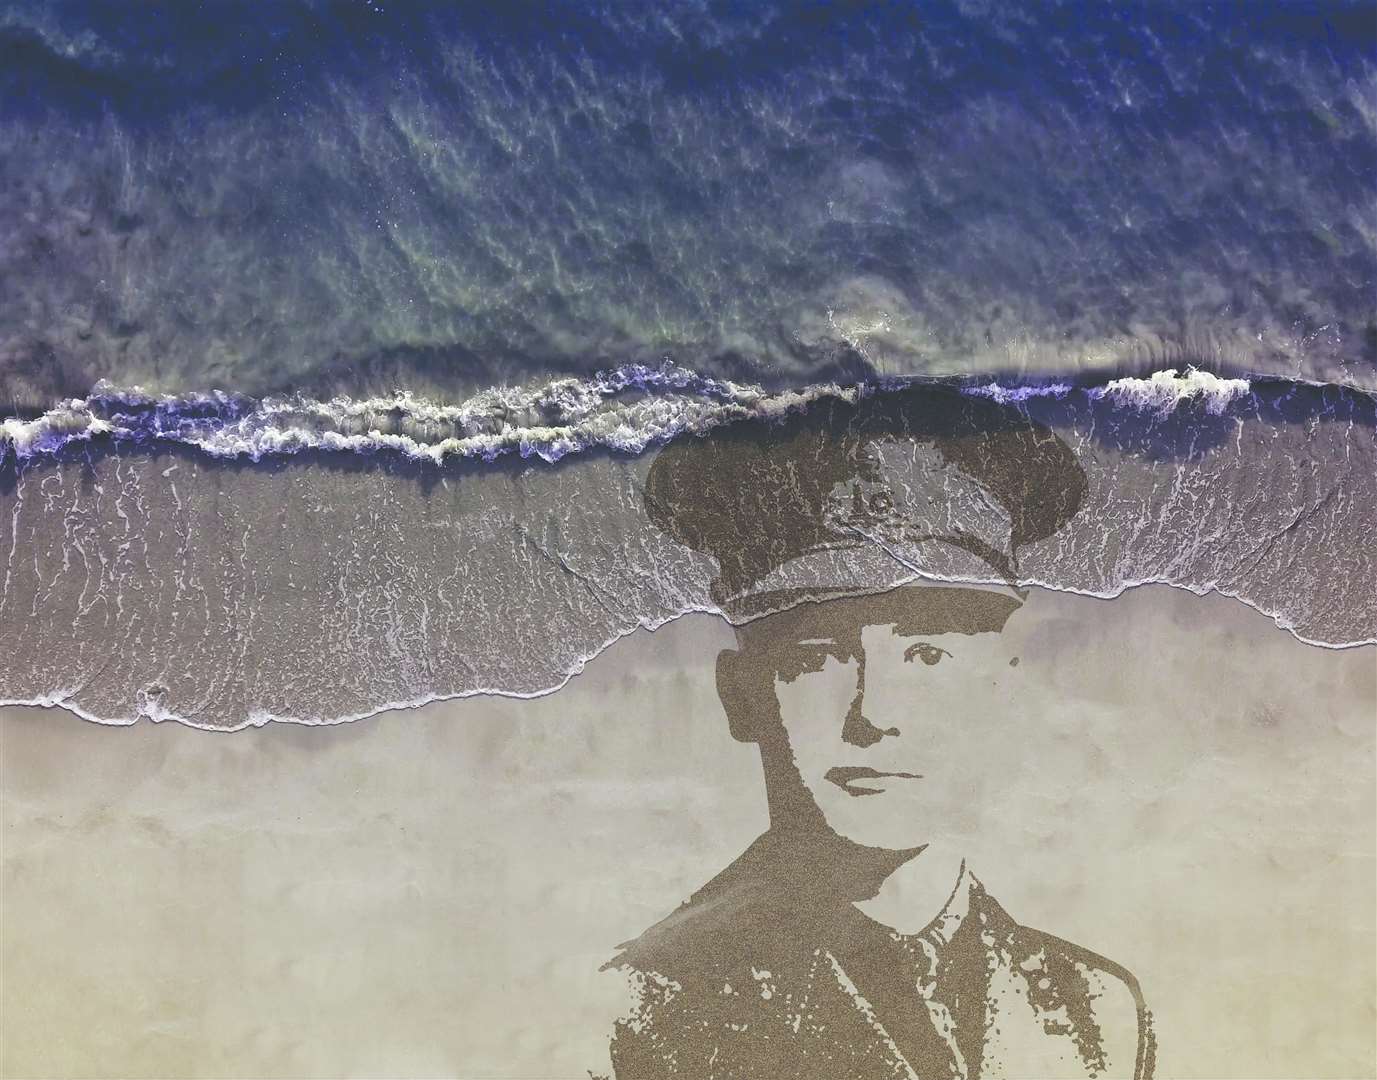 Pages of the Sea will see First World War heroes have their portraits carved into the sand